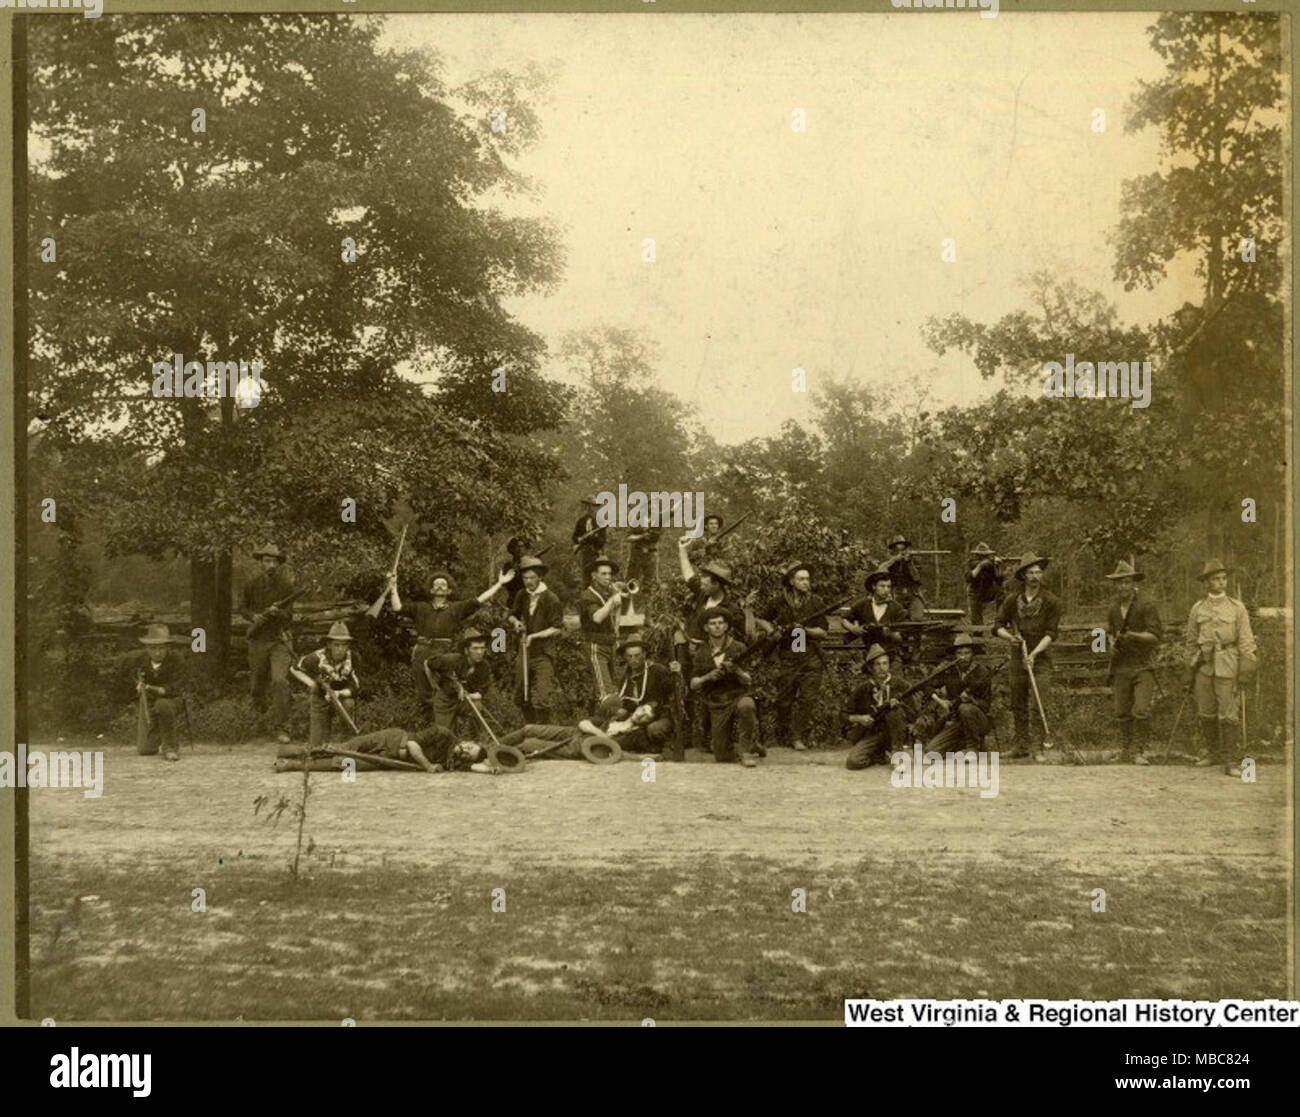 The First West Virginia Infantry was a National Guard unit stationed in Georgia during the Spanish and American War from 1898-1899. The unidentified soldiers in this photograph pretend action to defend their position from an attack. Stock Photo